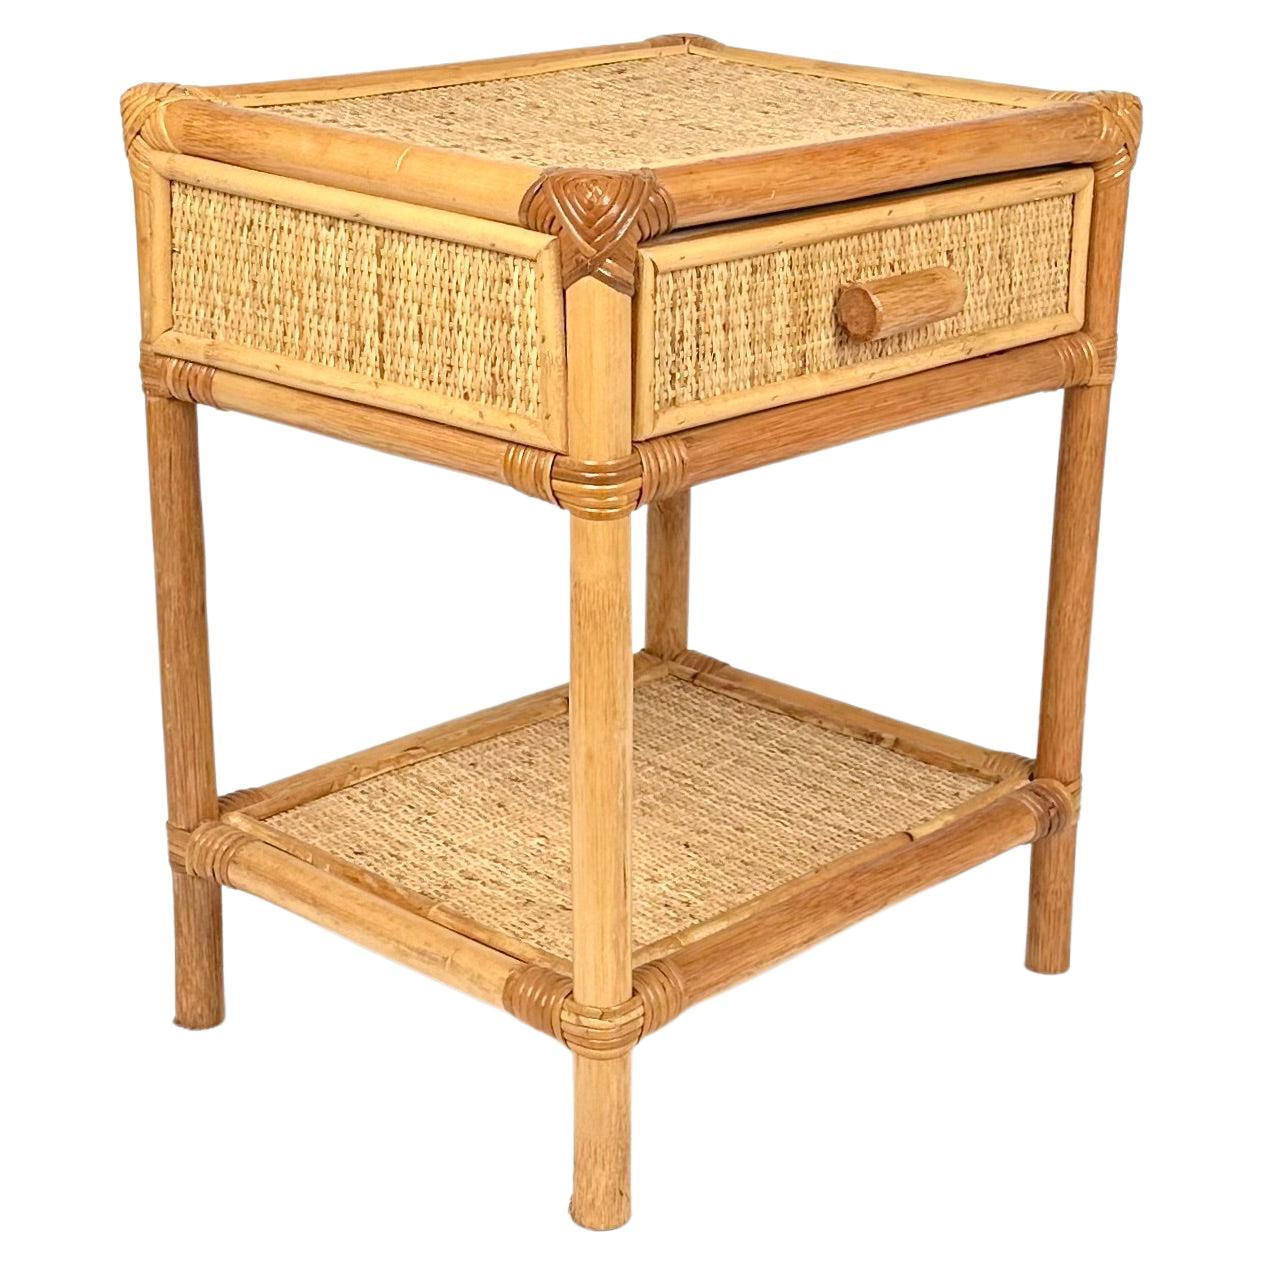 Midcentury bedside table nightstands in bamboo and rattan with drawer and bottom shelf. 

Made in Italy in the 1970s. 

Perfect in any room as well as next to a sofa or in any bathroom.